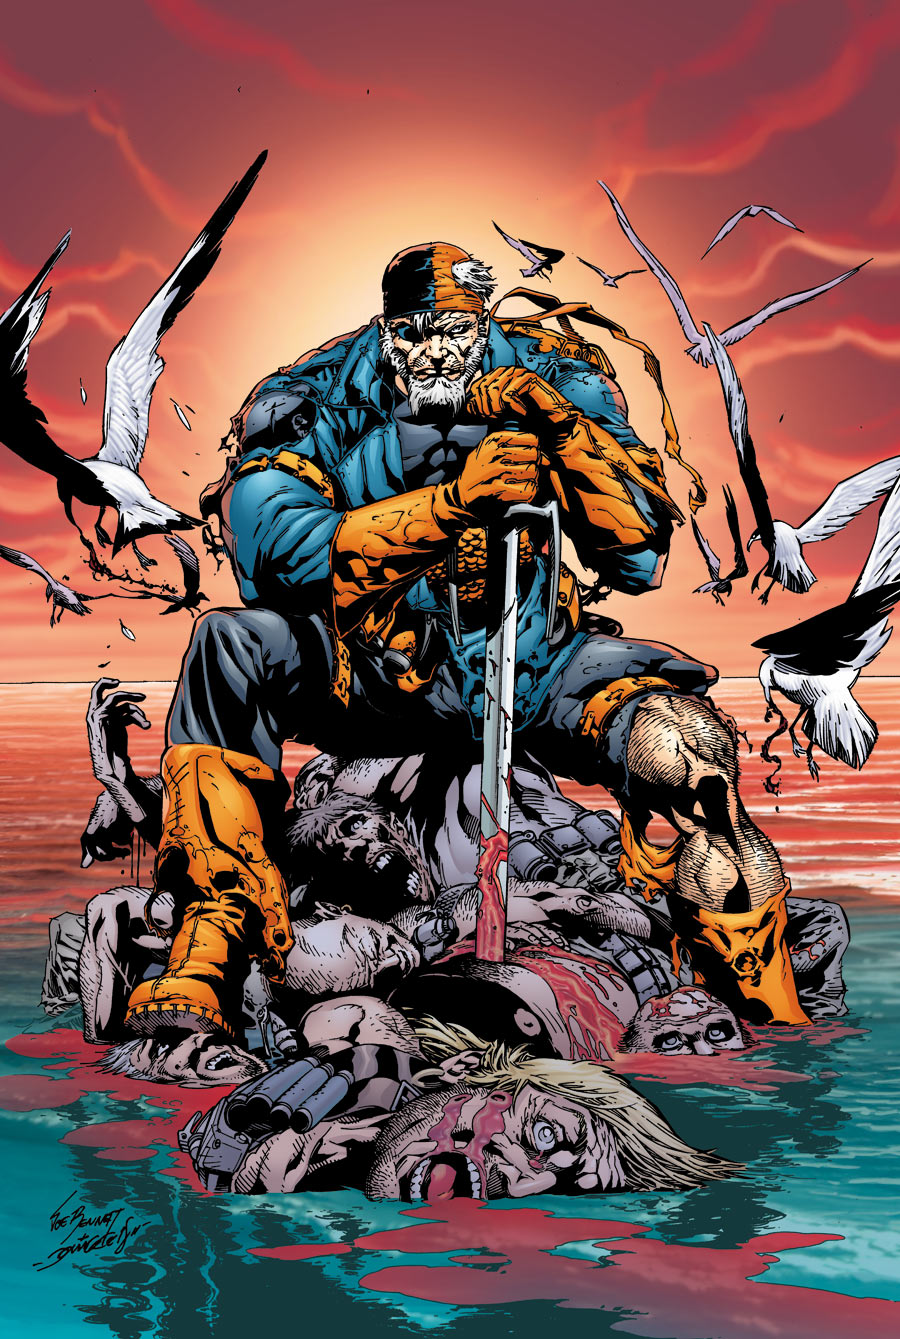 Flashpoint Deathstroke and the Curse of the Ravager #3